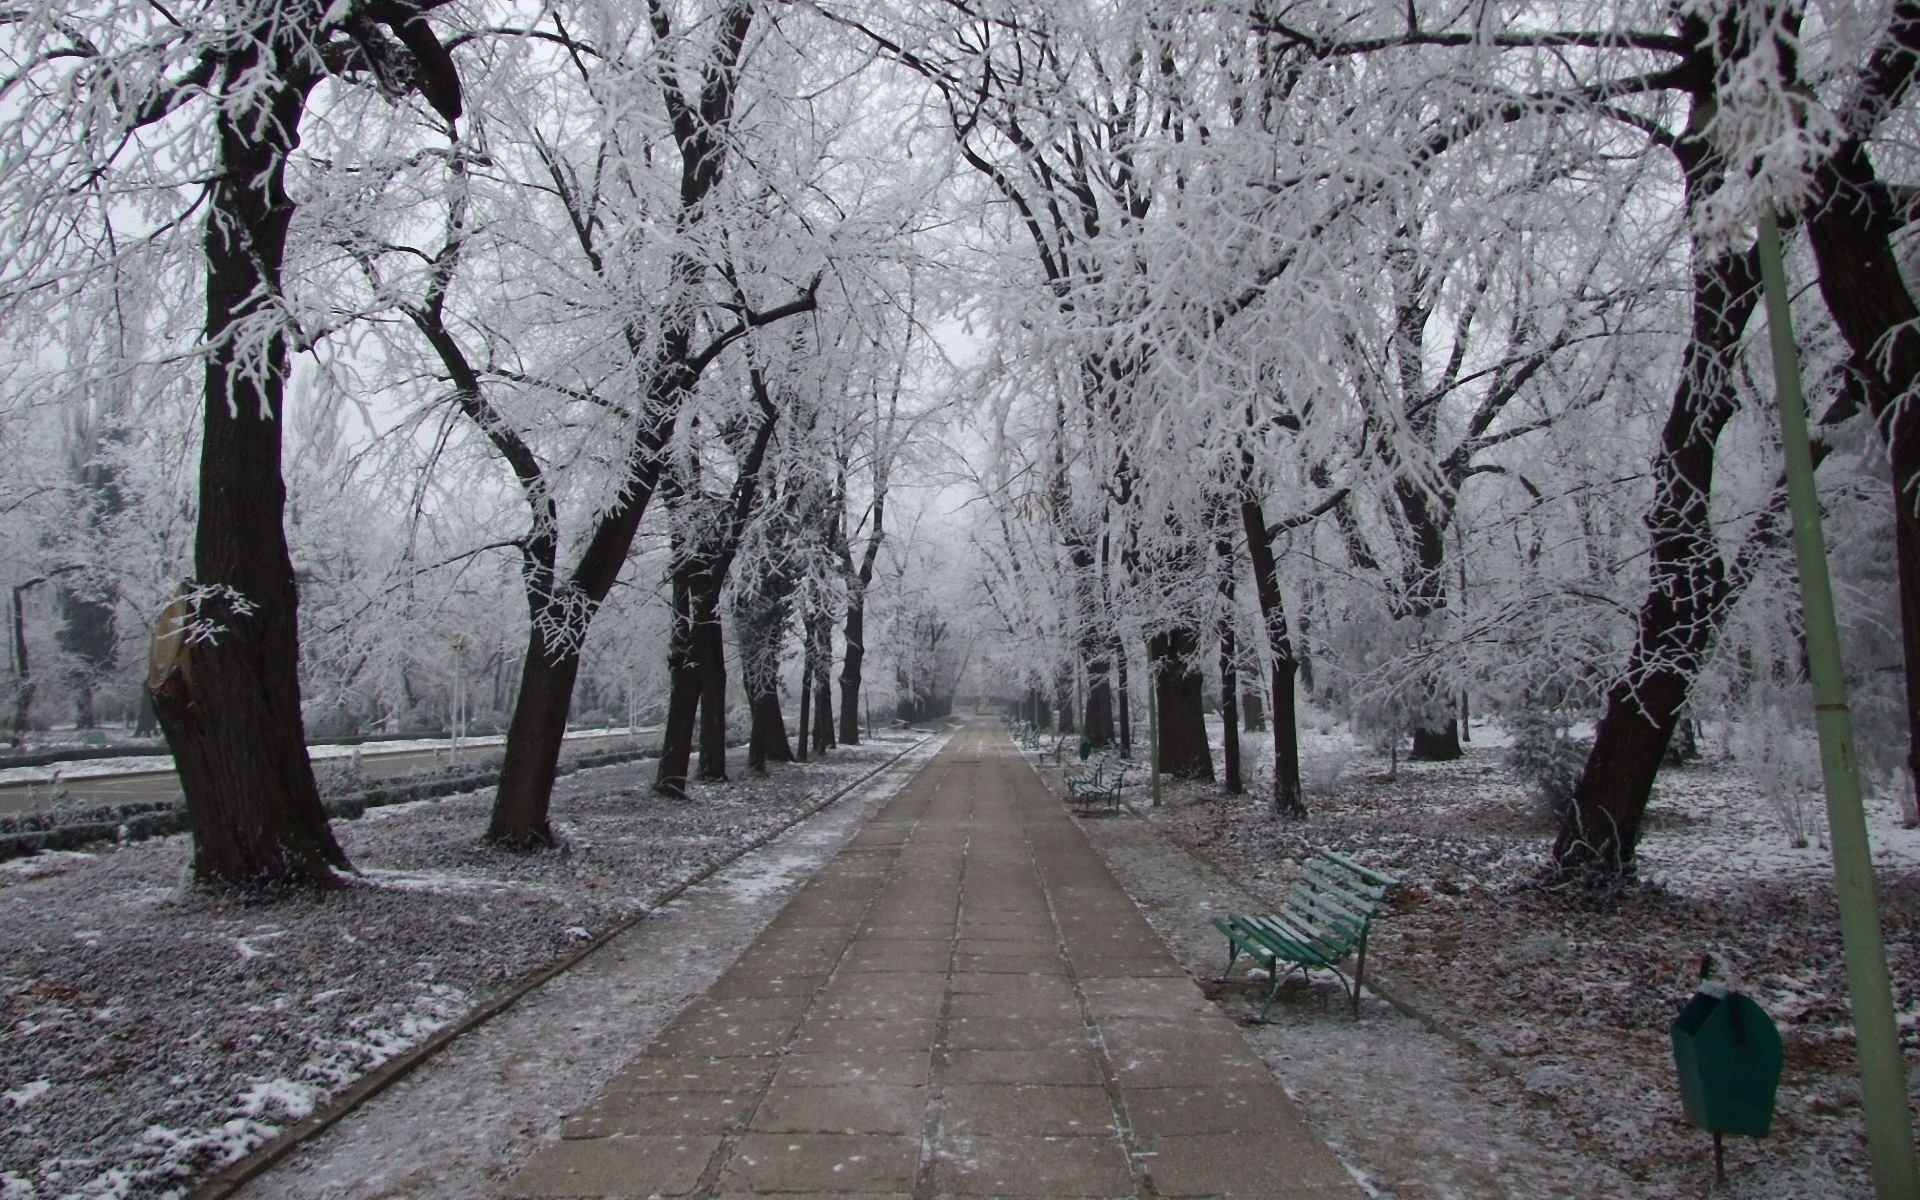 nature, Landscapes, Winter, Snow, Frost, Seasons, Park, Garden, Path, Sidewalk, Roads, Bench, Trees, Cold, Freezing, Ice Wallpaper